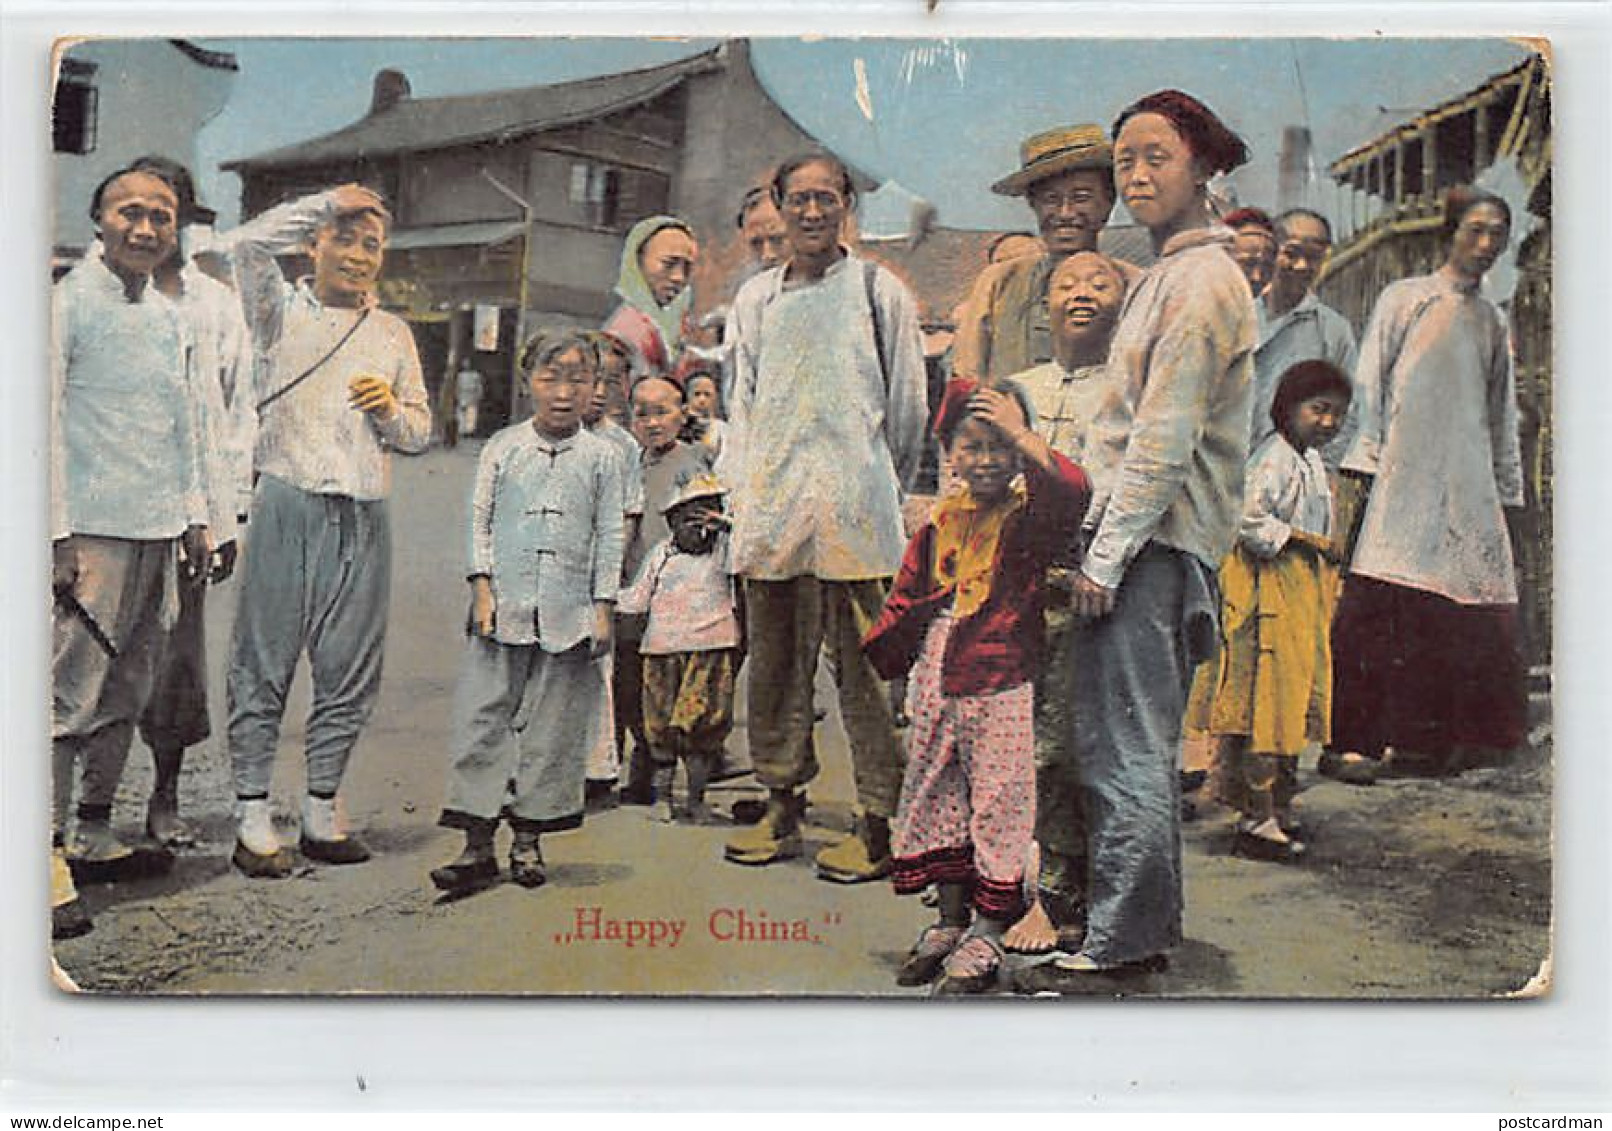 China - Happy Child - SEE SCANS FOR CONDITION - Publ. Kingshill 22310 - China